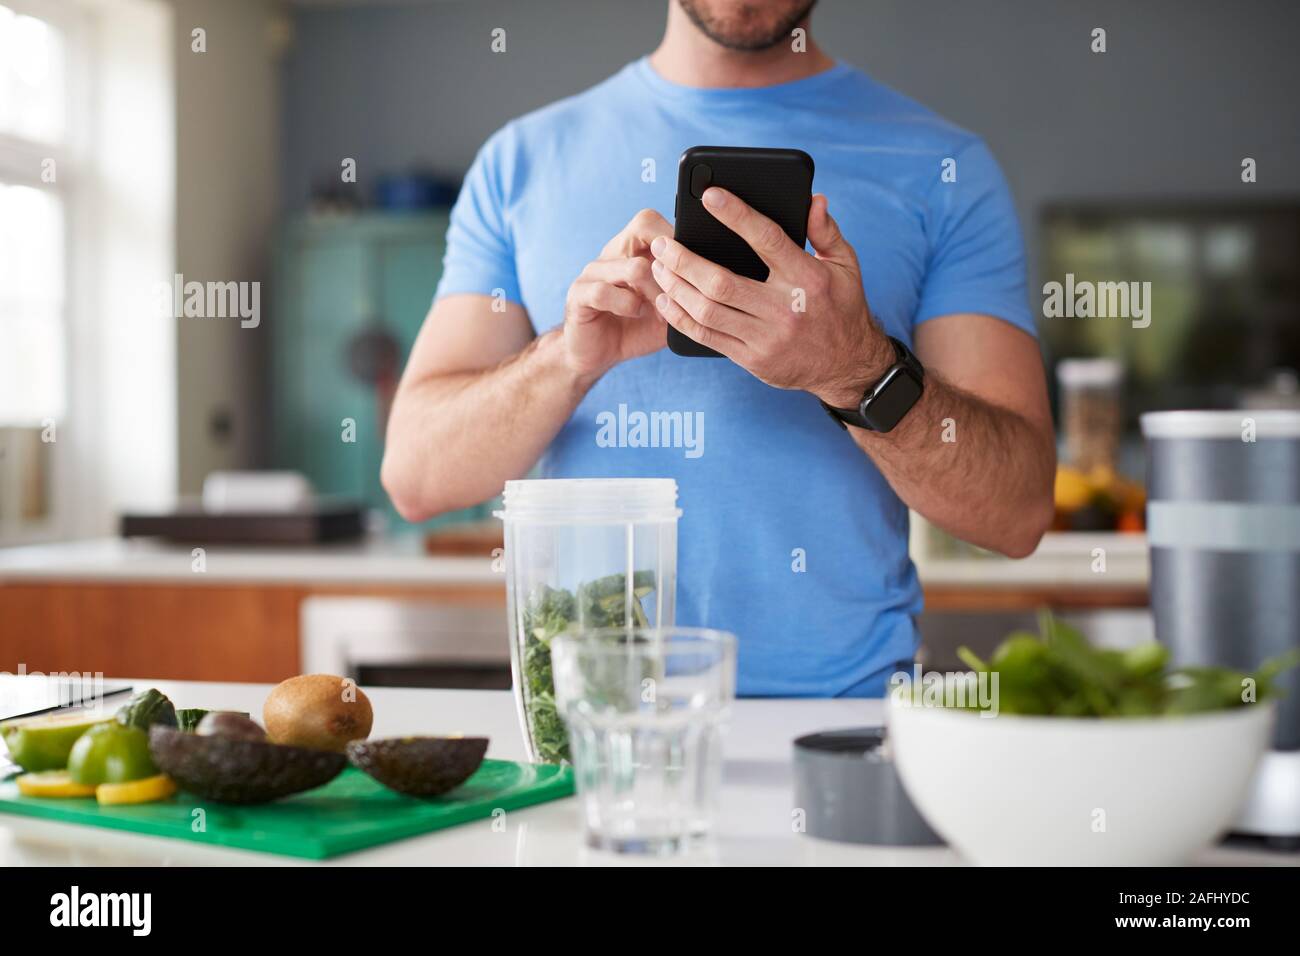 Close Up Of Man Using Fitness Tracker To Count Calories For Post Workout Juice Drink He Is Making Stock Photo